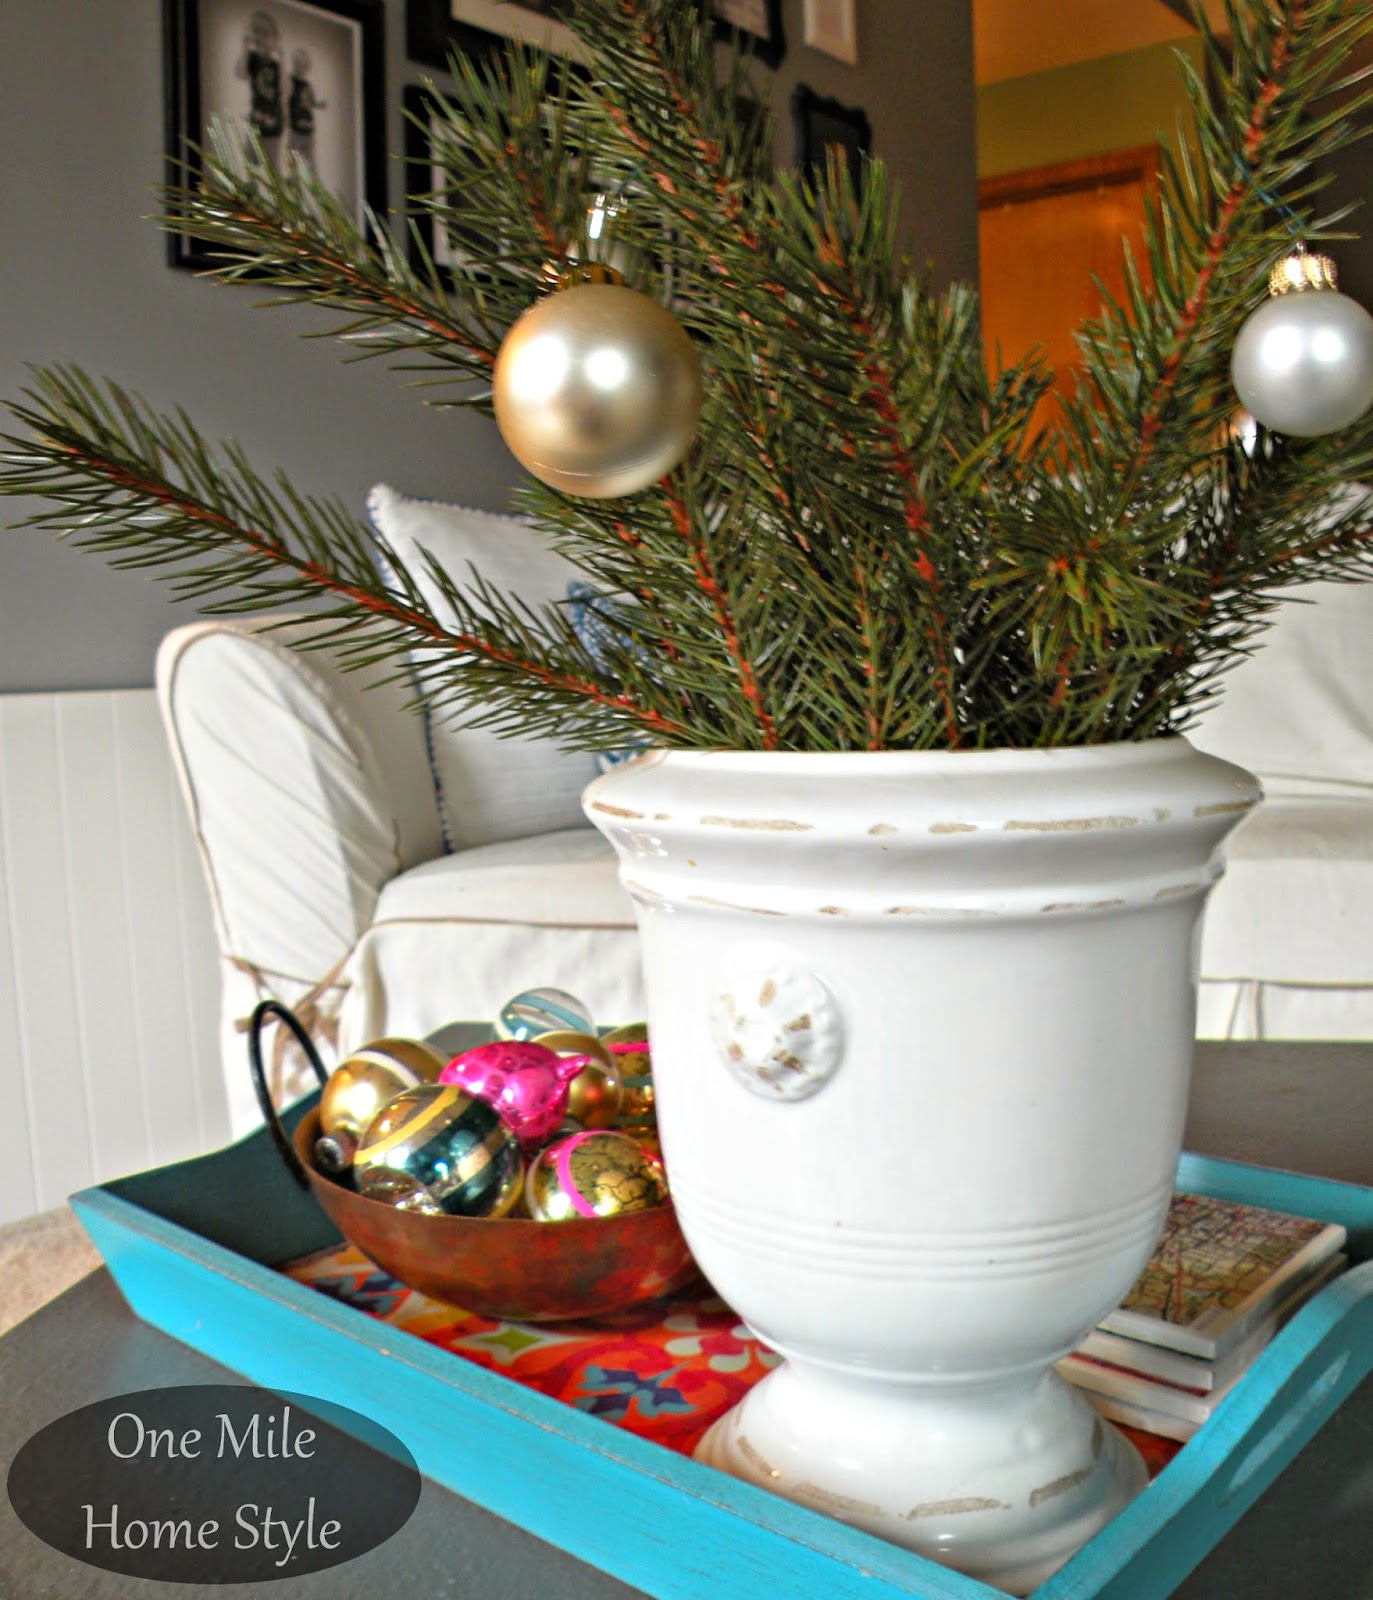 Christmas greenery with a copper bowl of vintage Christmas ornaments